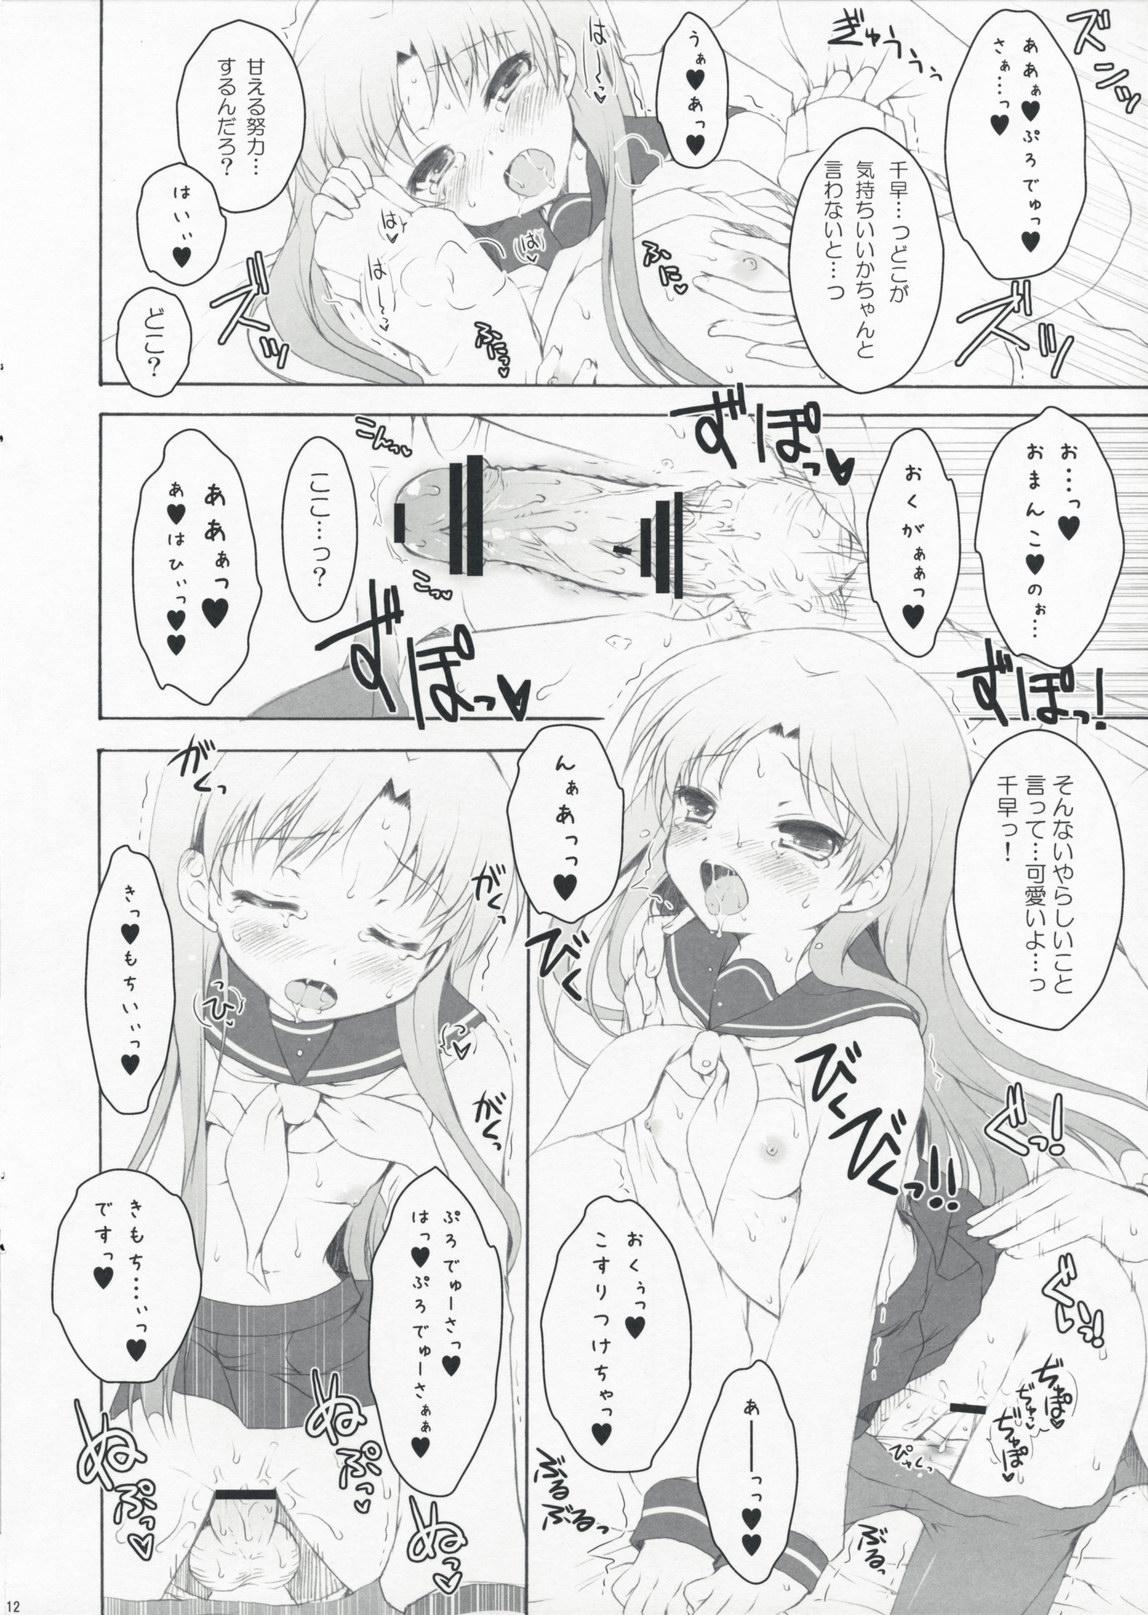 Classroom miss you - The idolmaster Ejaculation - Page 11